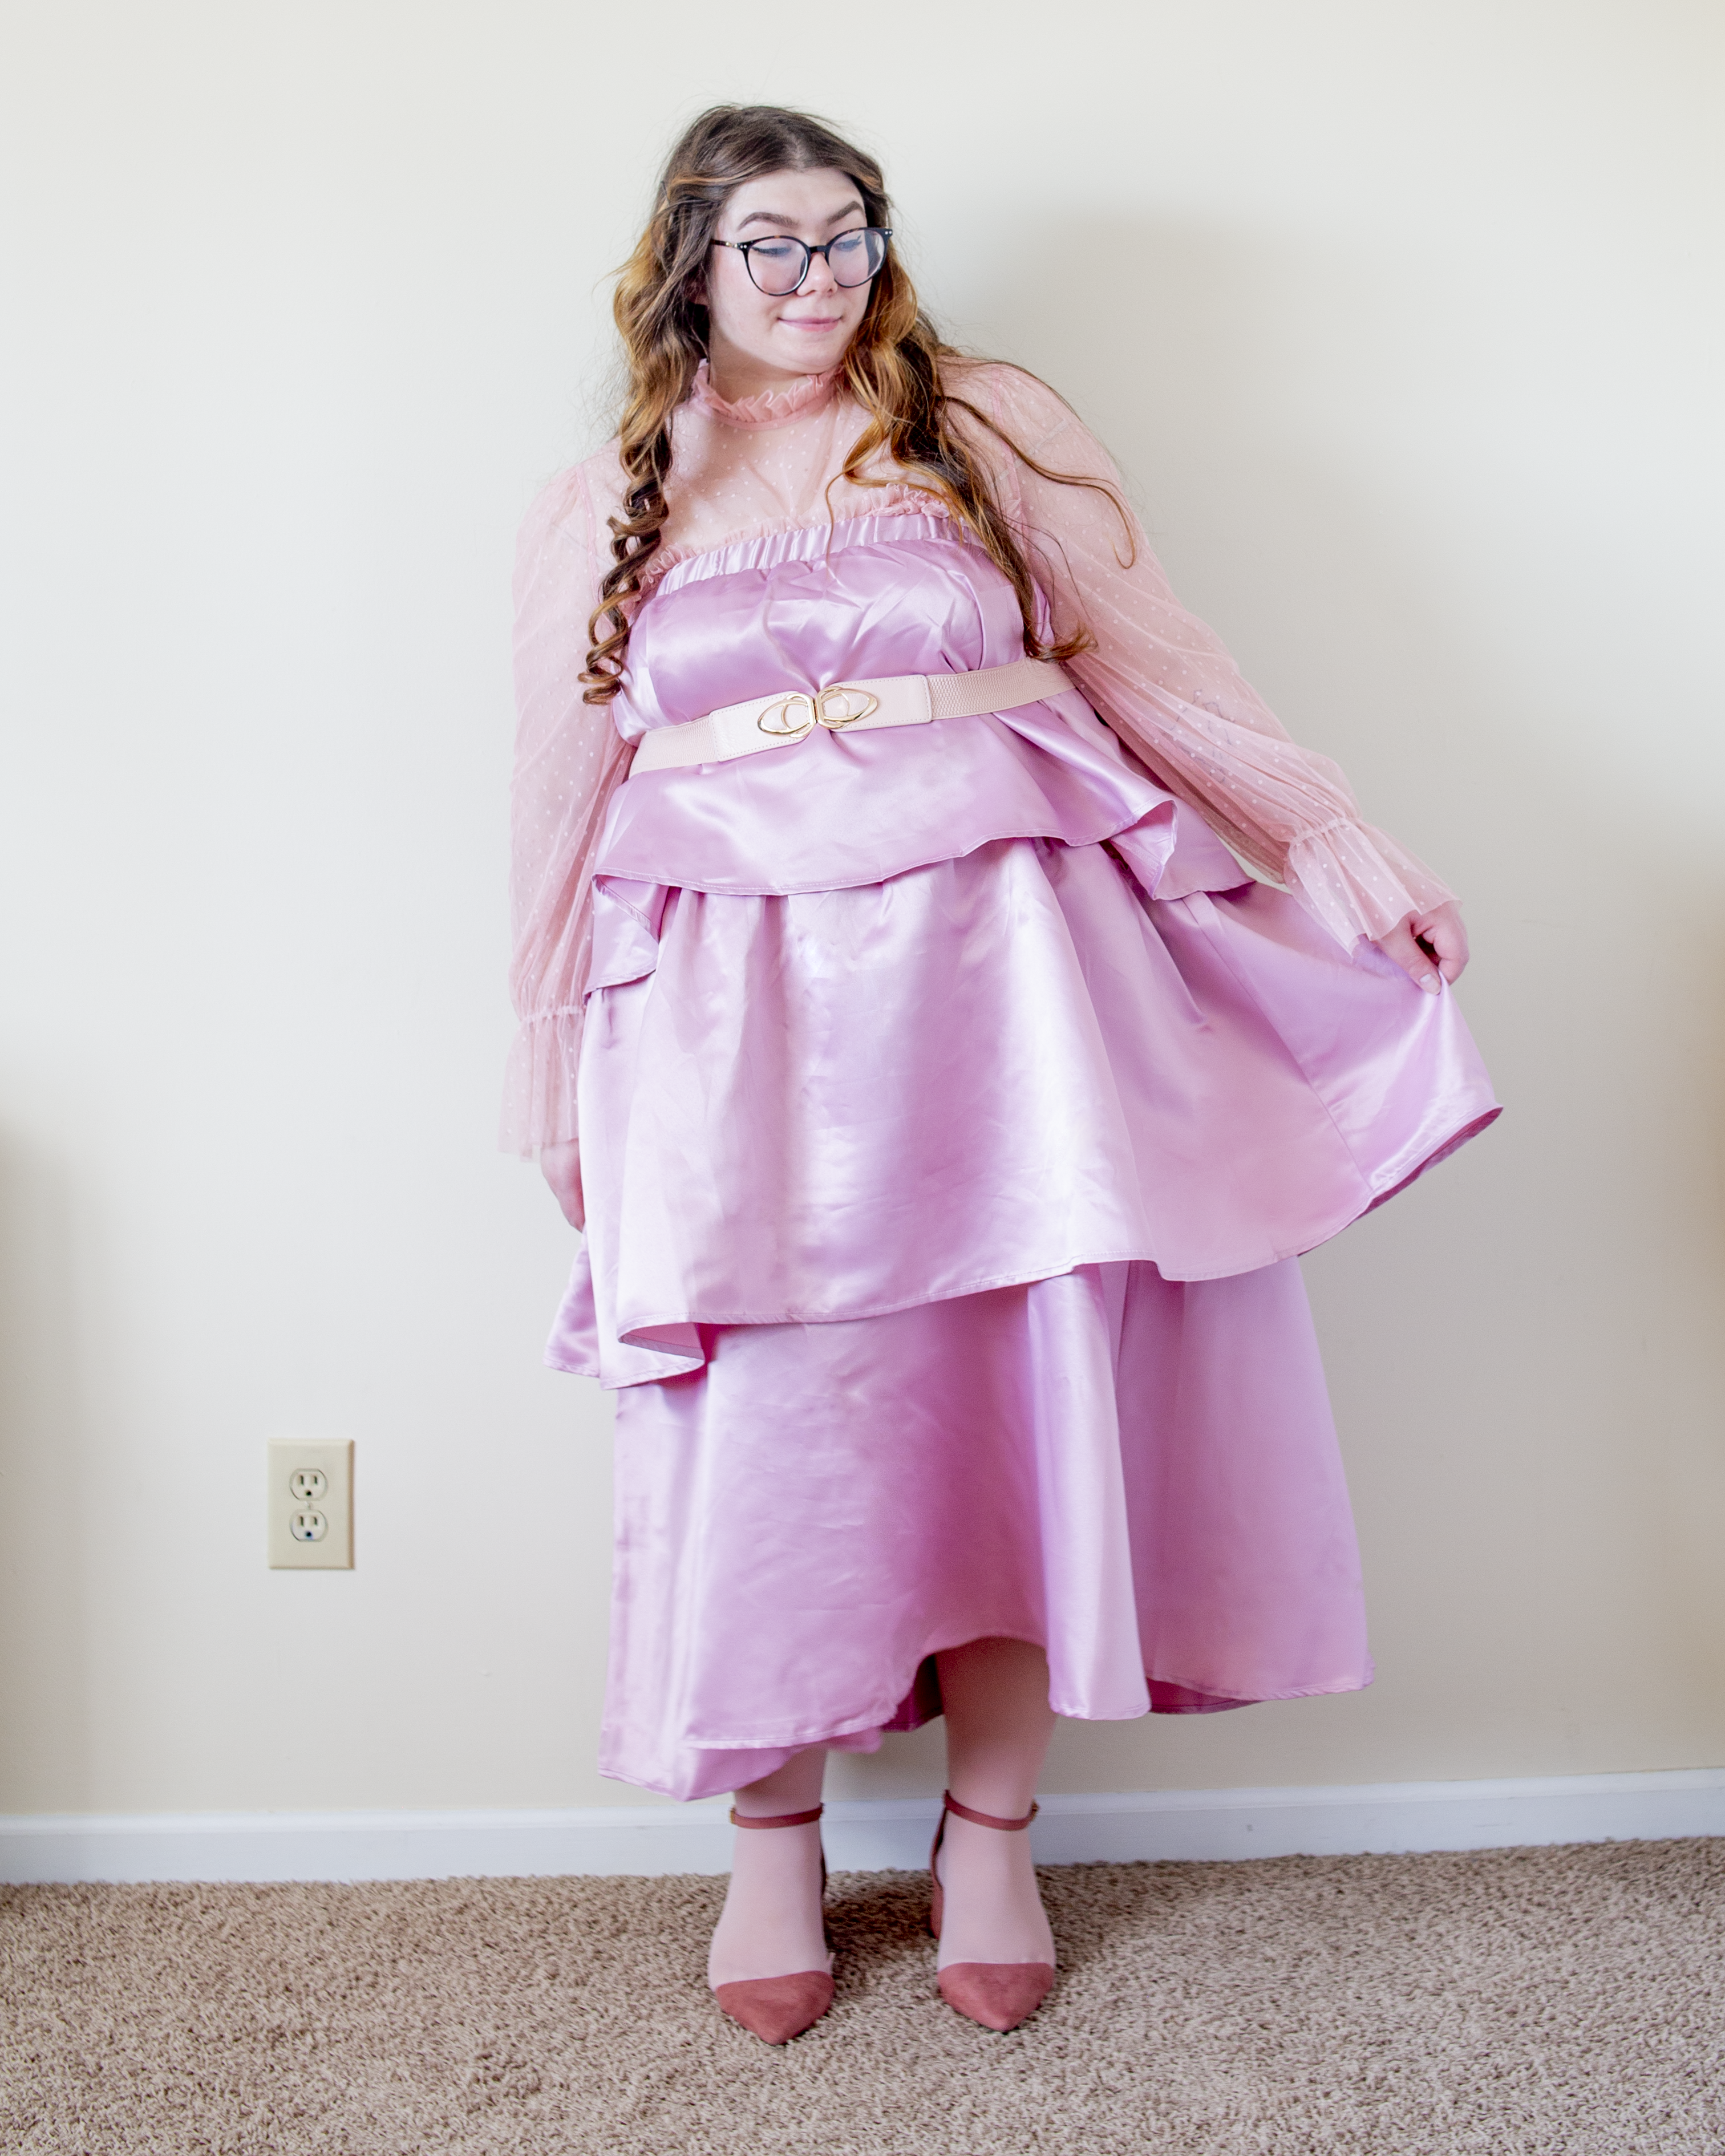 An outfit consisting of a pastel pink high neck long sleeve polka dot sheer blouse with a ruffle neckline under a three tiered pastel pink satin skirt, worn as dress, and pastel pink ankle strap heels.